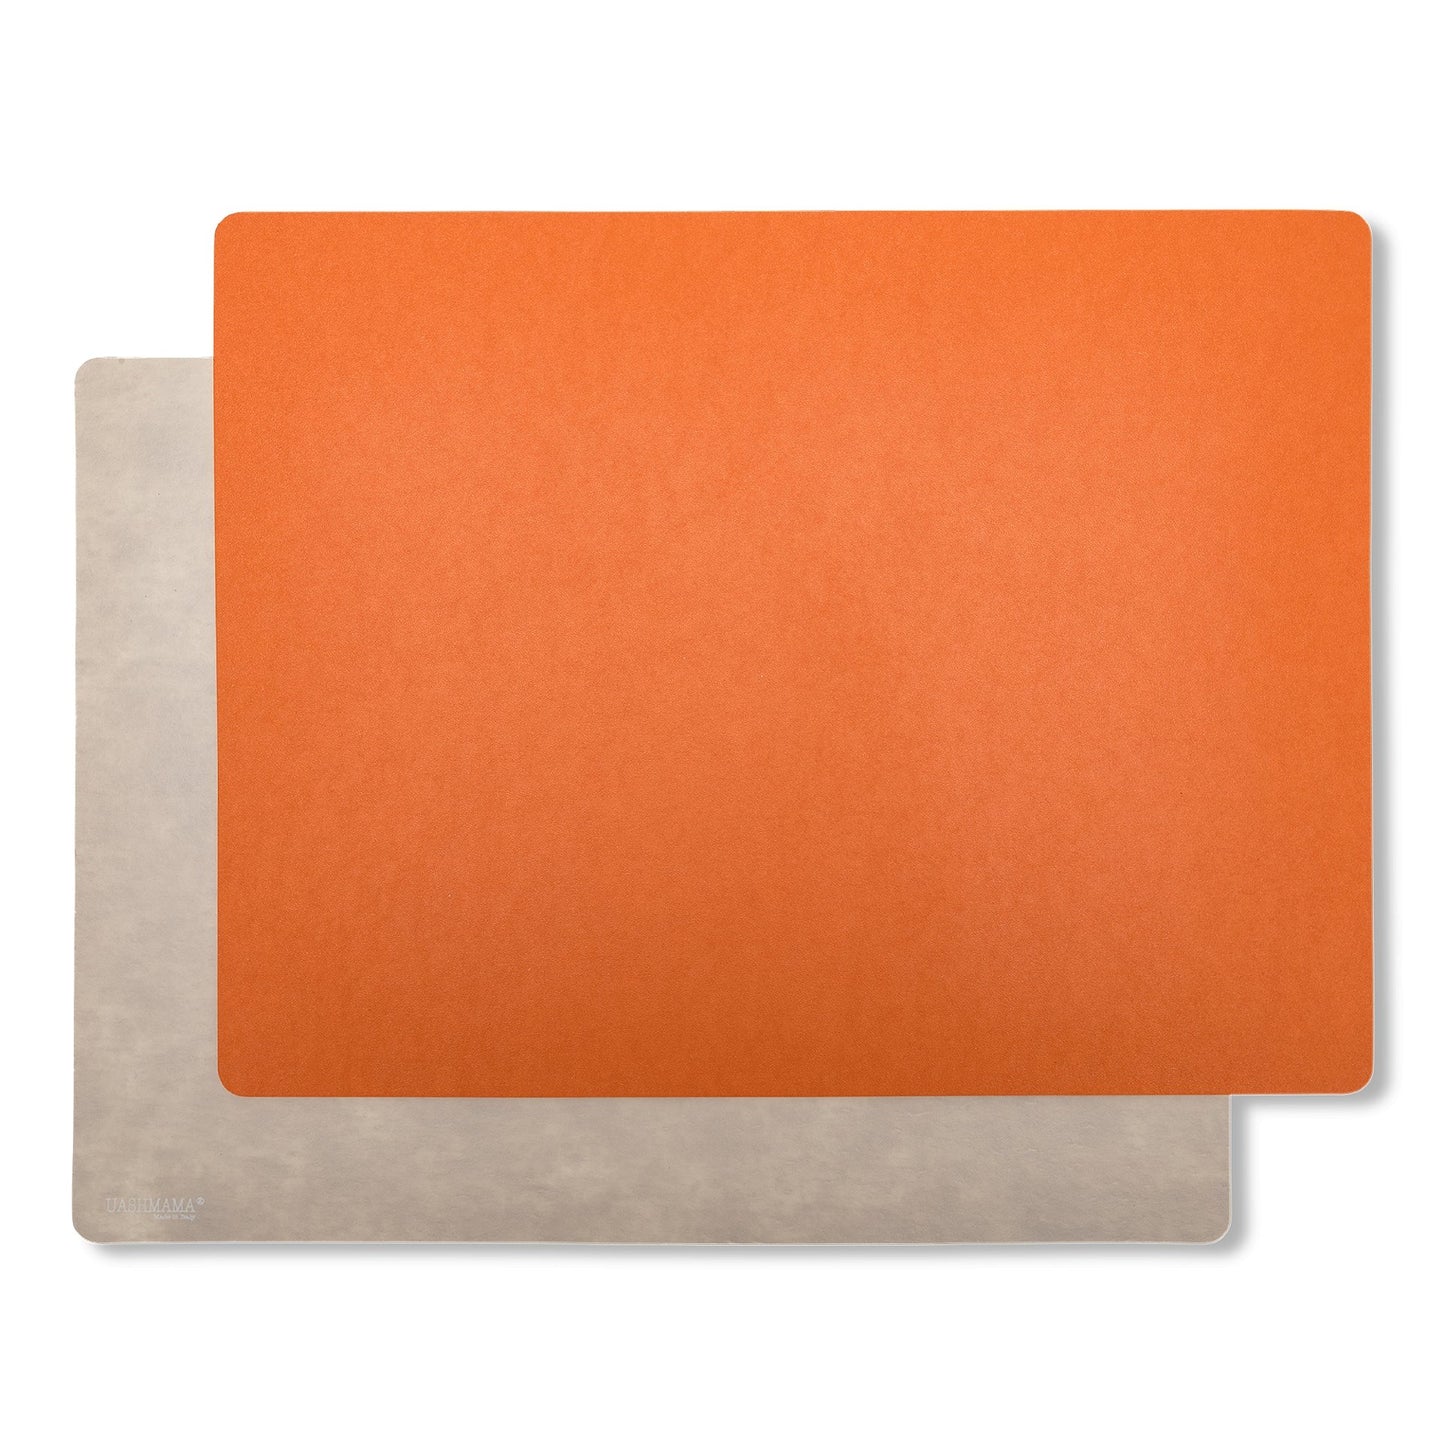 Two rectangular washable paper placemats are stacked one on top of the other. The one in the foreground is orange and the one at rear is beige.